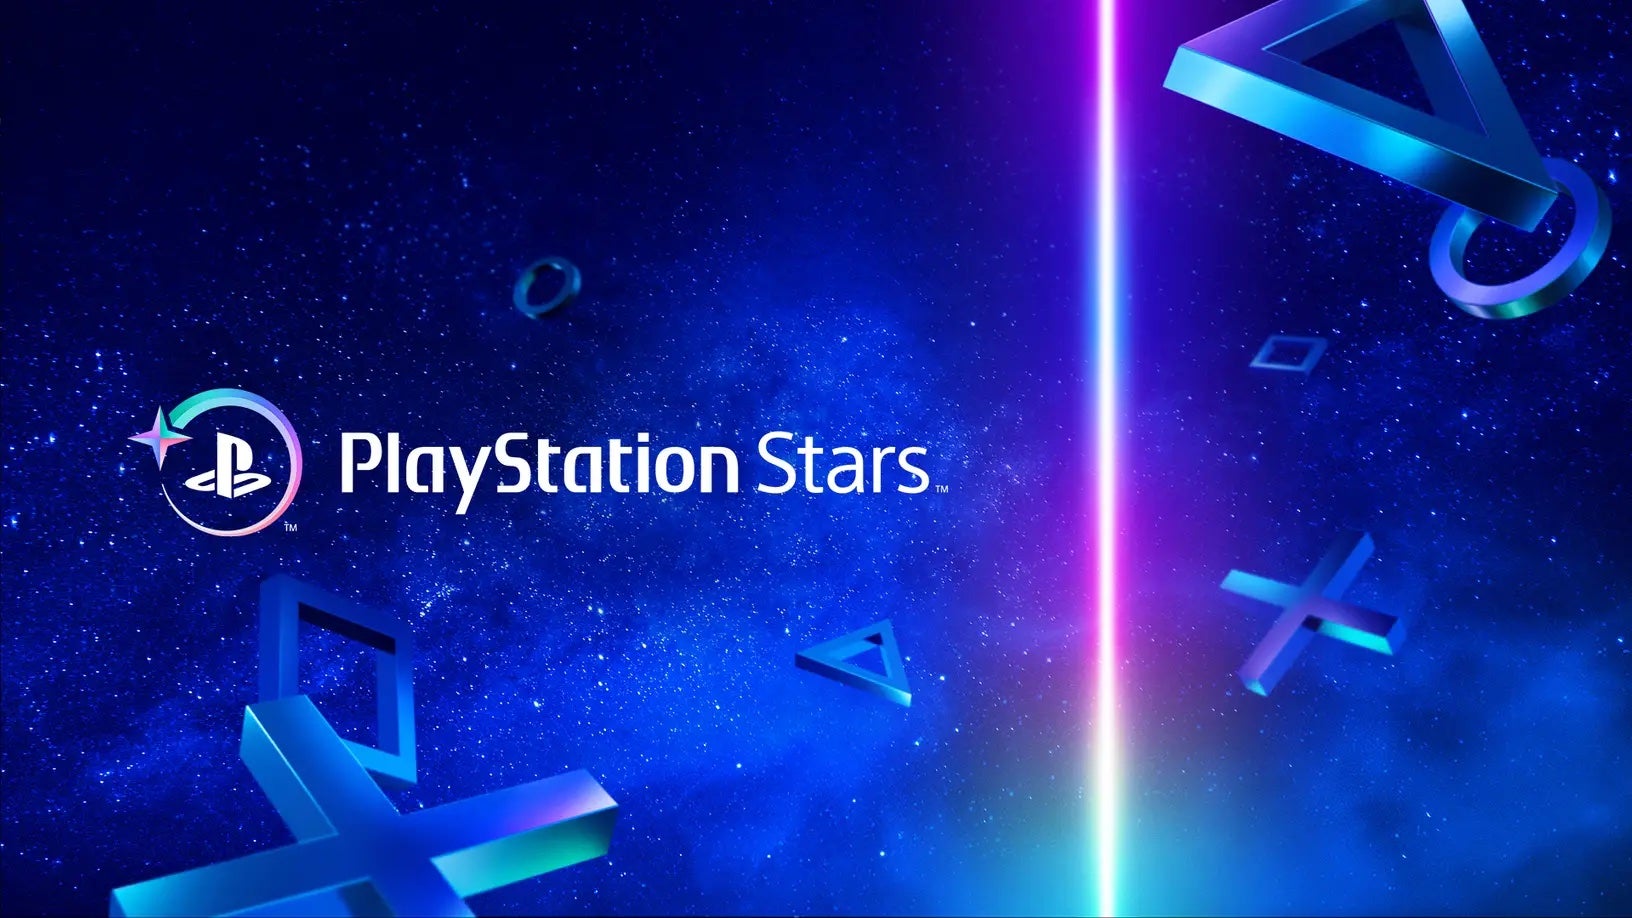 Image for PlayStation Stars rumoured to have exclusive invitation-only tier